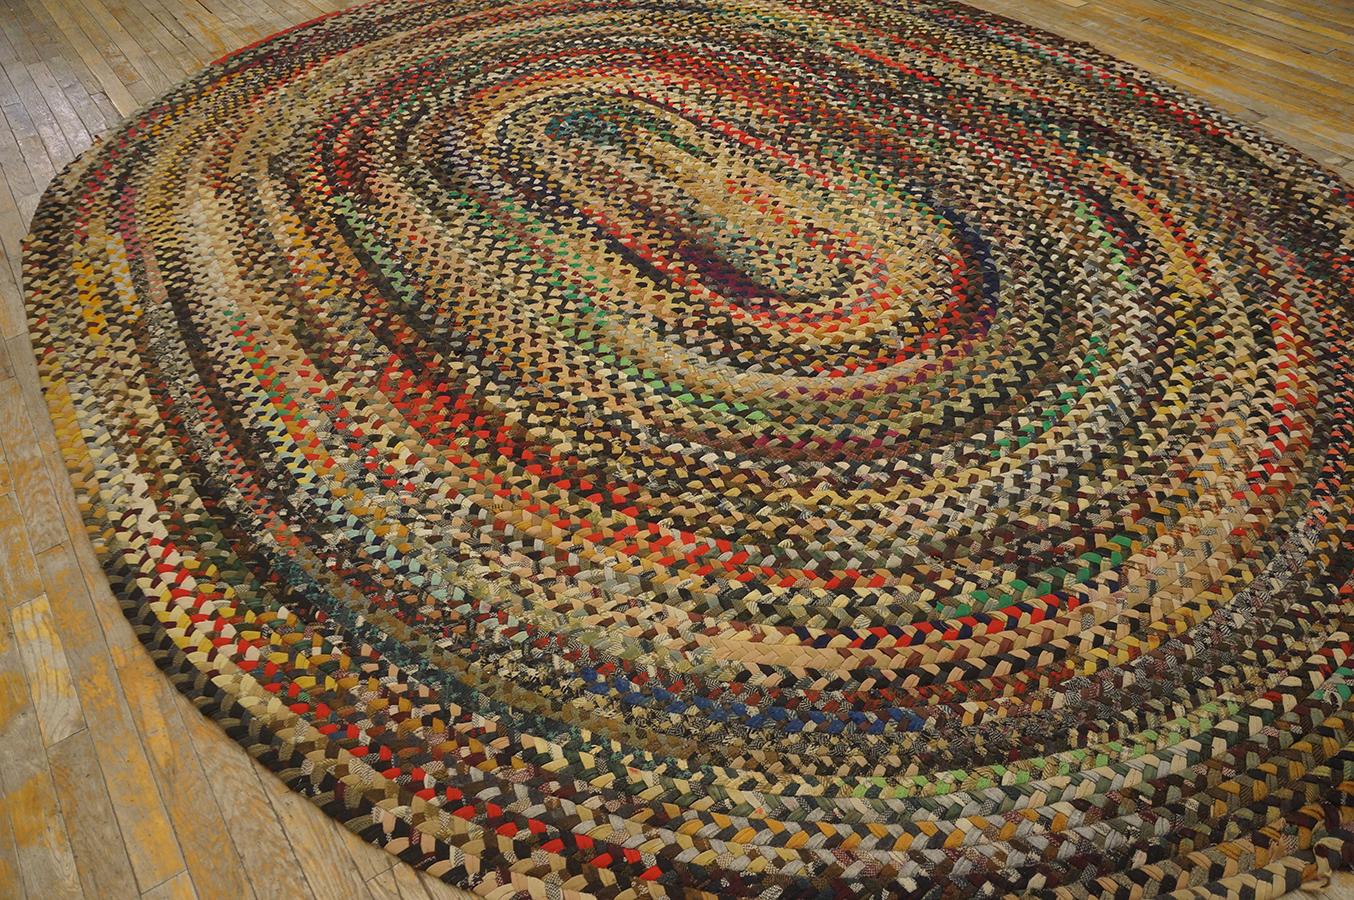 Country 1940s American Braided Rug ( 9' x 11' 6